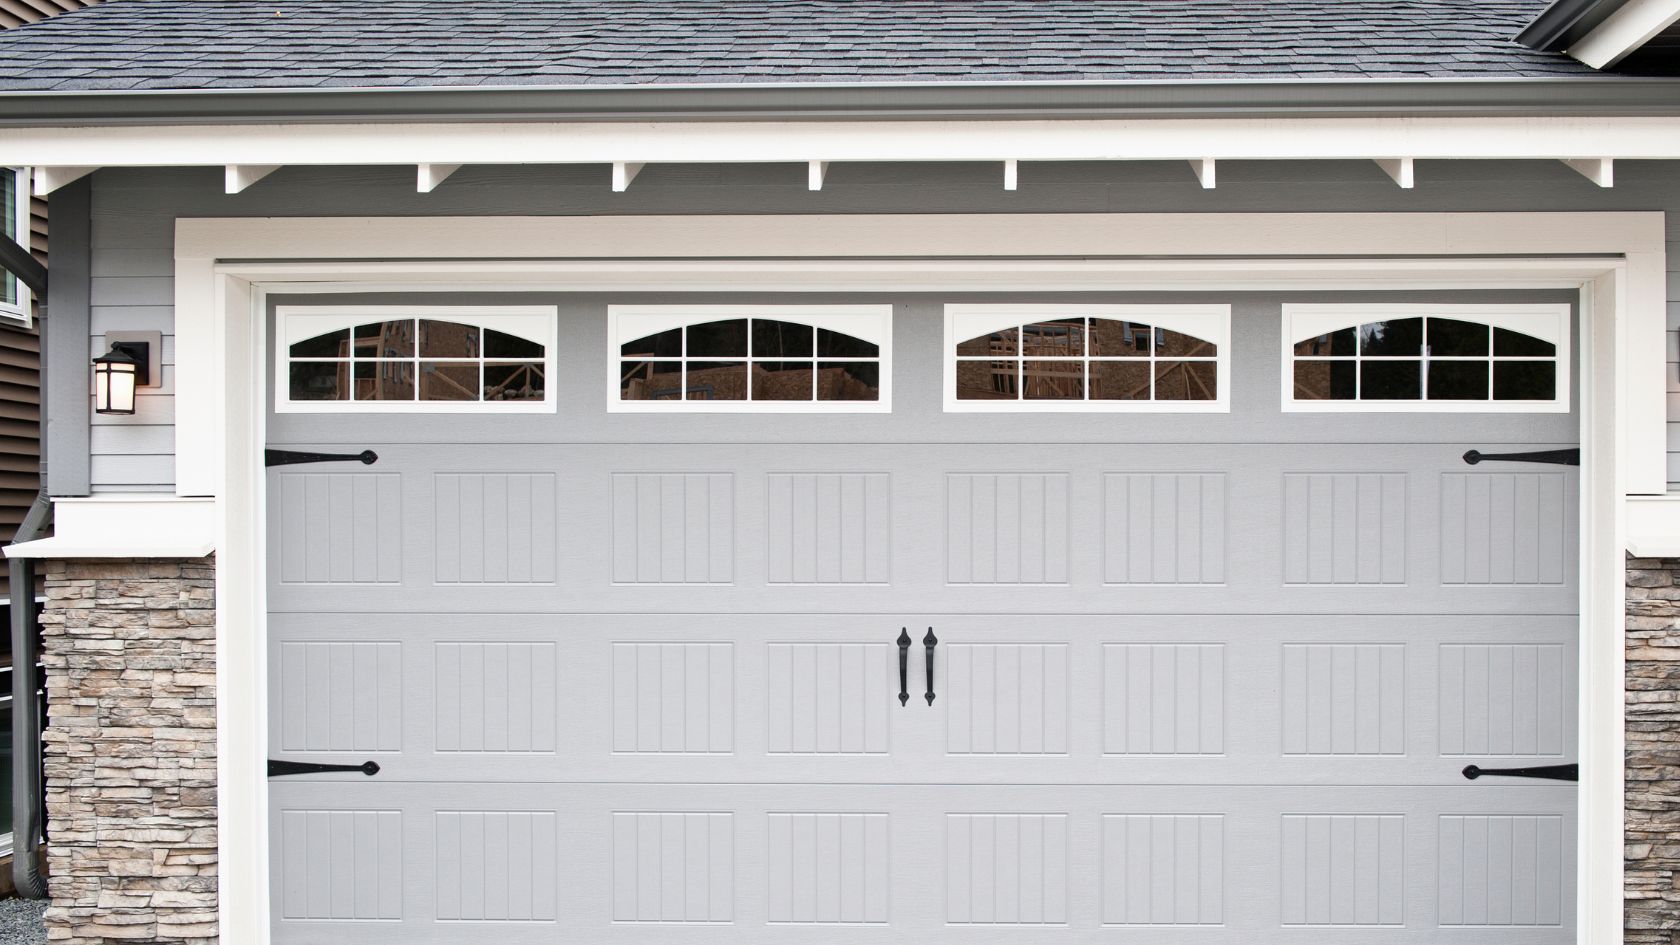 A gray garage door with windows on a house